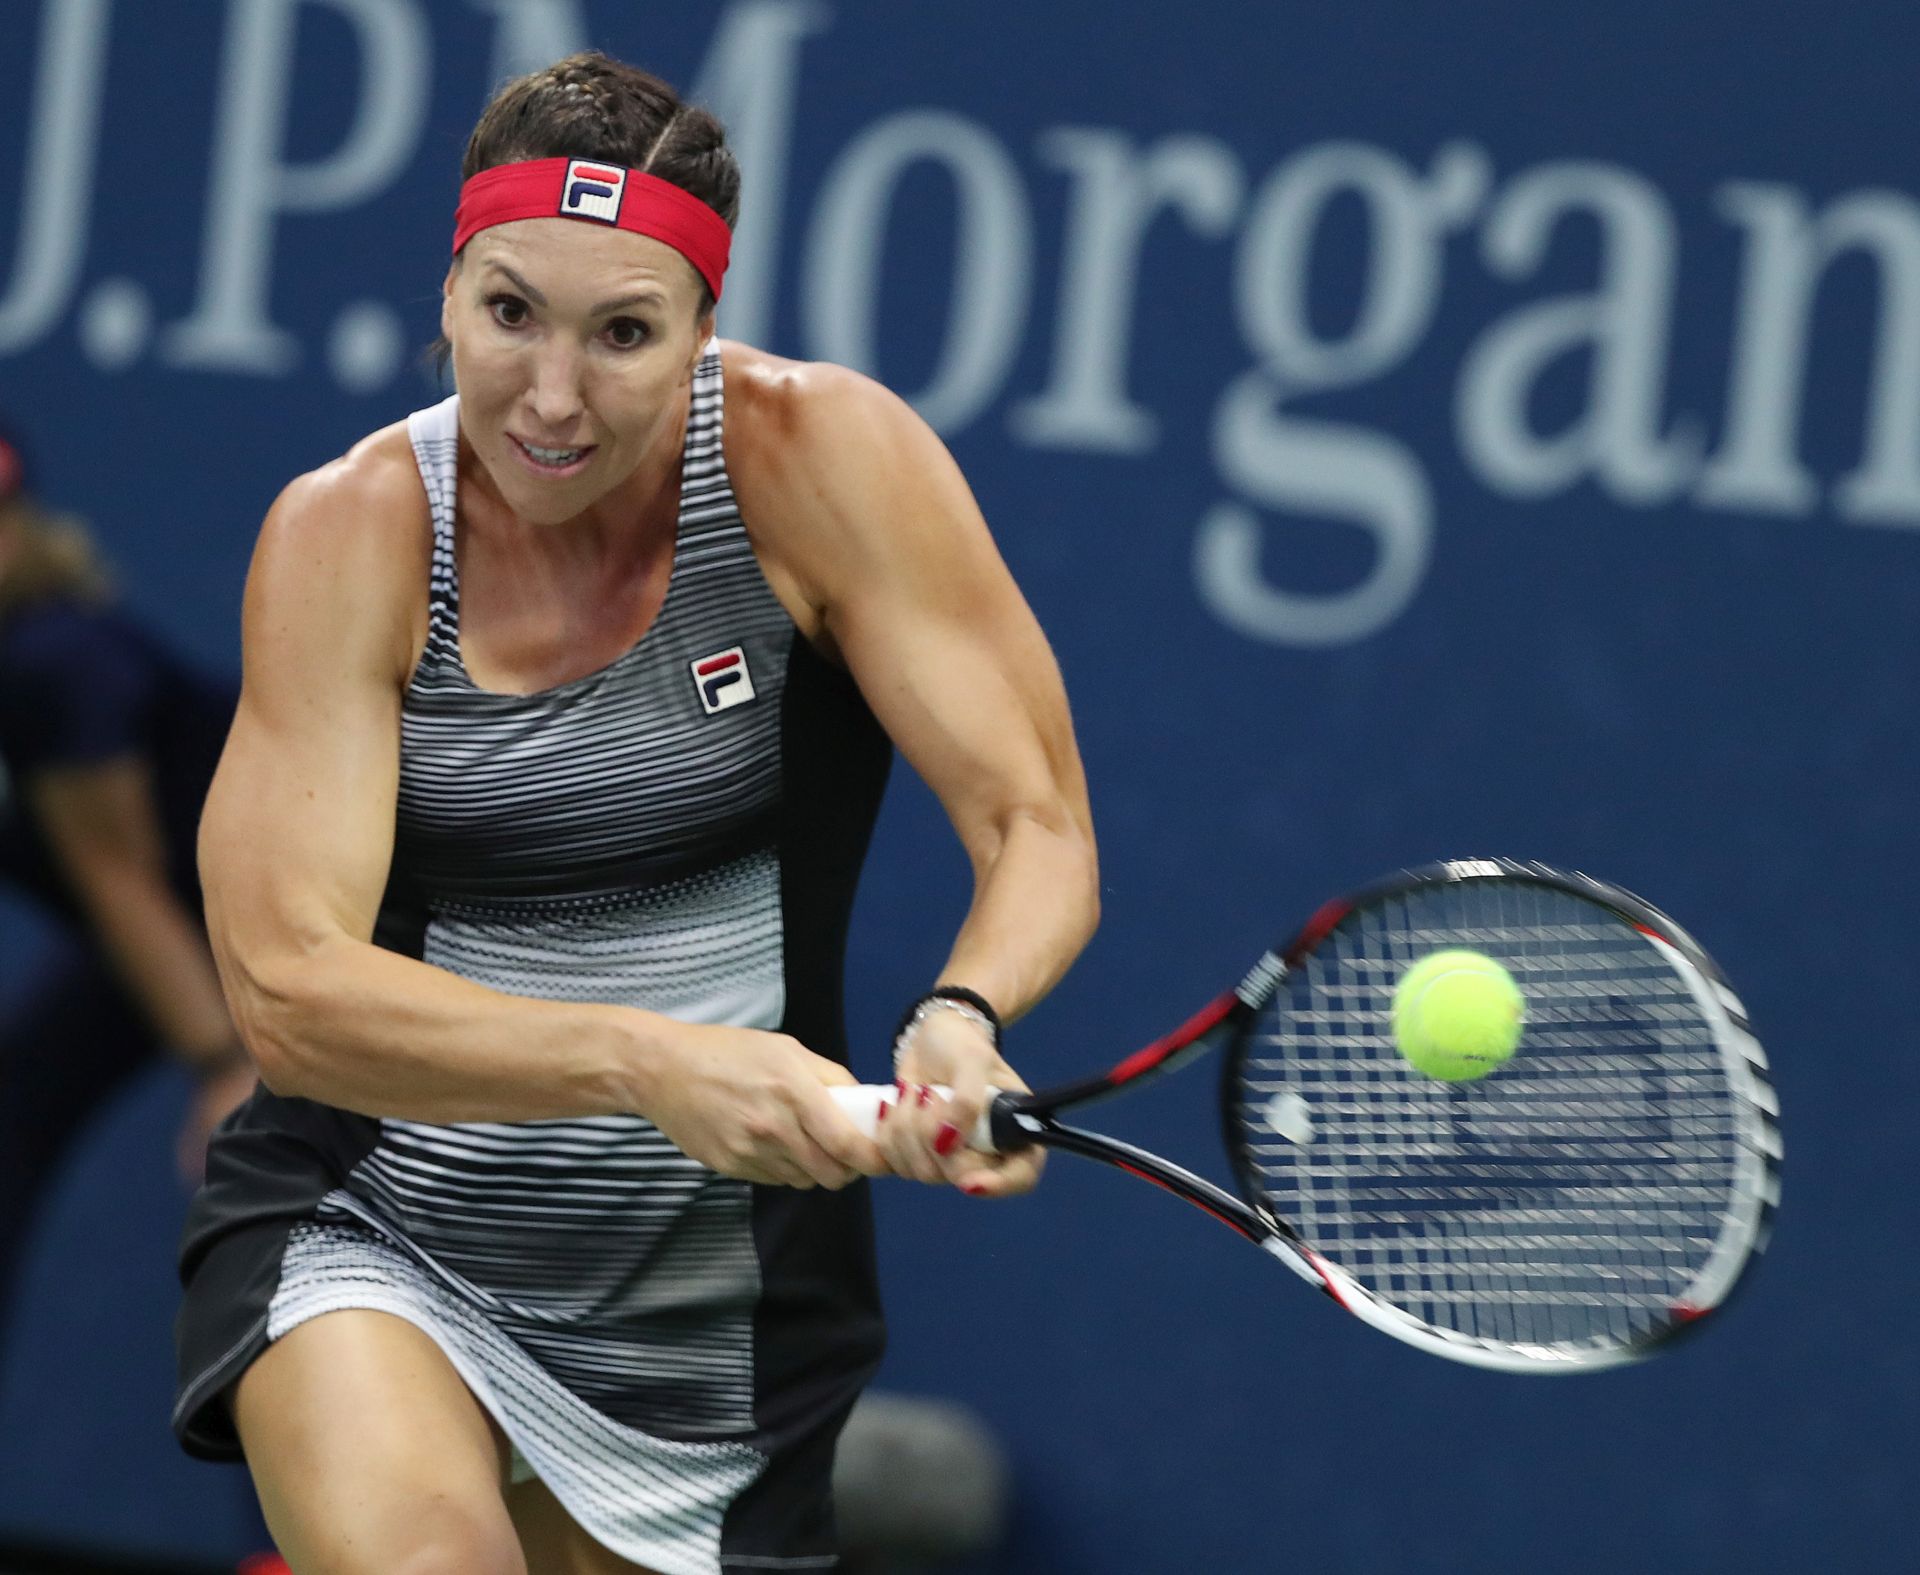 epa05519332 Jelena Jankovic of Serbia hits a return to Carla Suarez Navarro of Spain on the fourth day of the US Open Tennis Championships at the USTA National Tennis Center in Flushing Meadows, New York, USA, 01 September 2016.  The US Open runs through September 11.  EPA/JUSTIN LANE